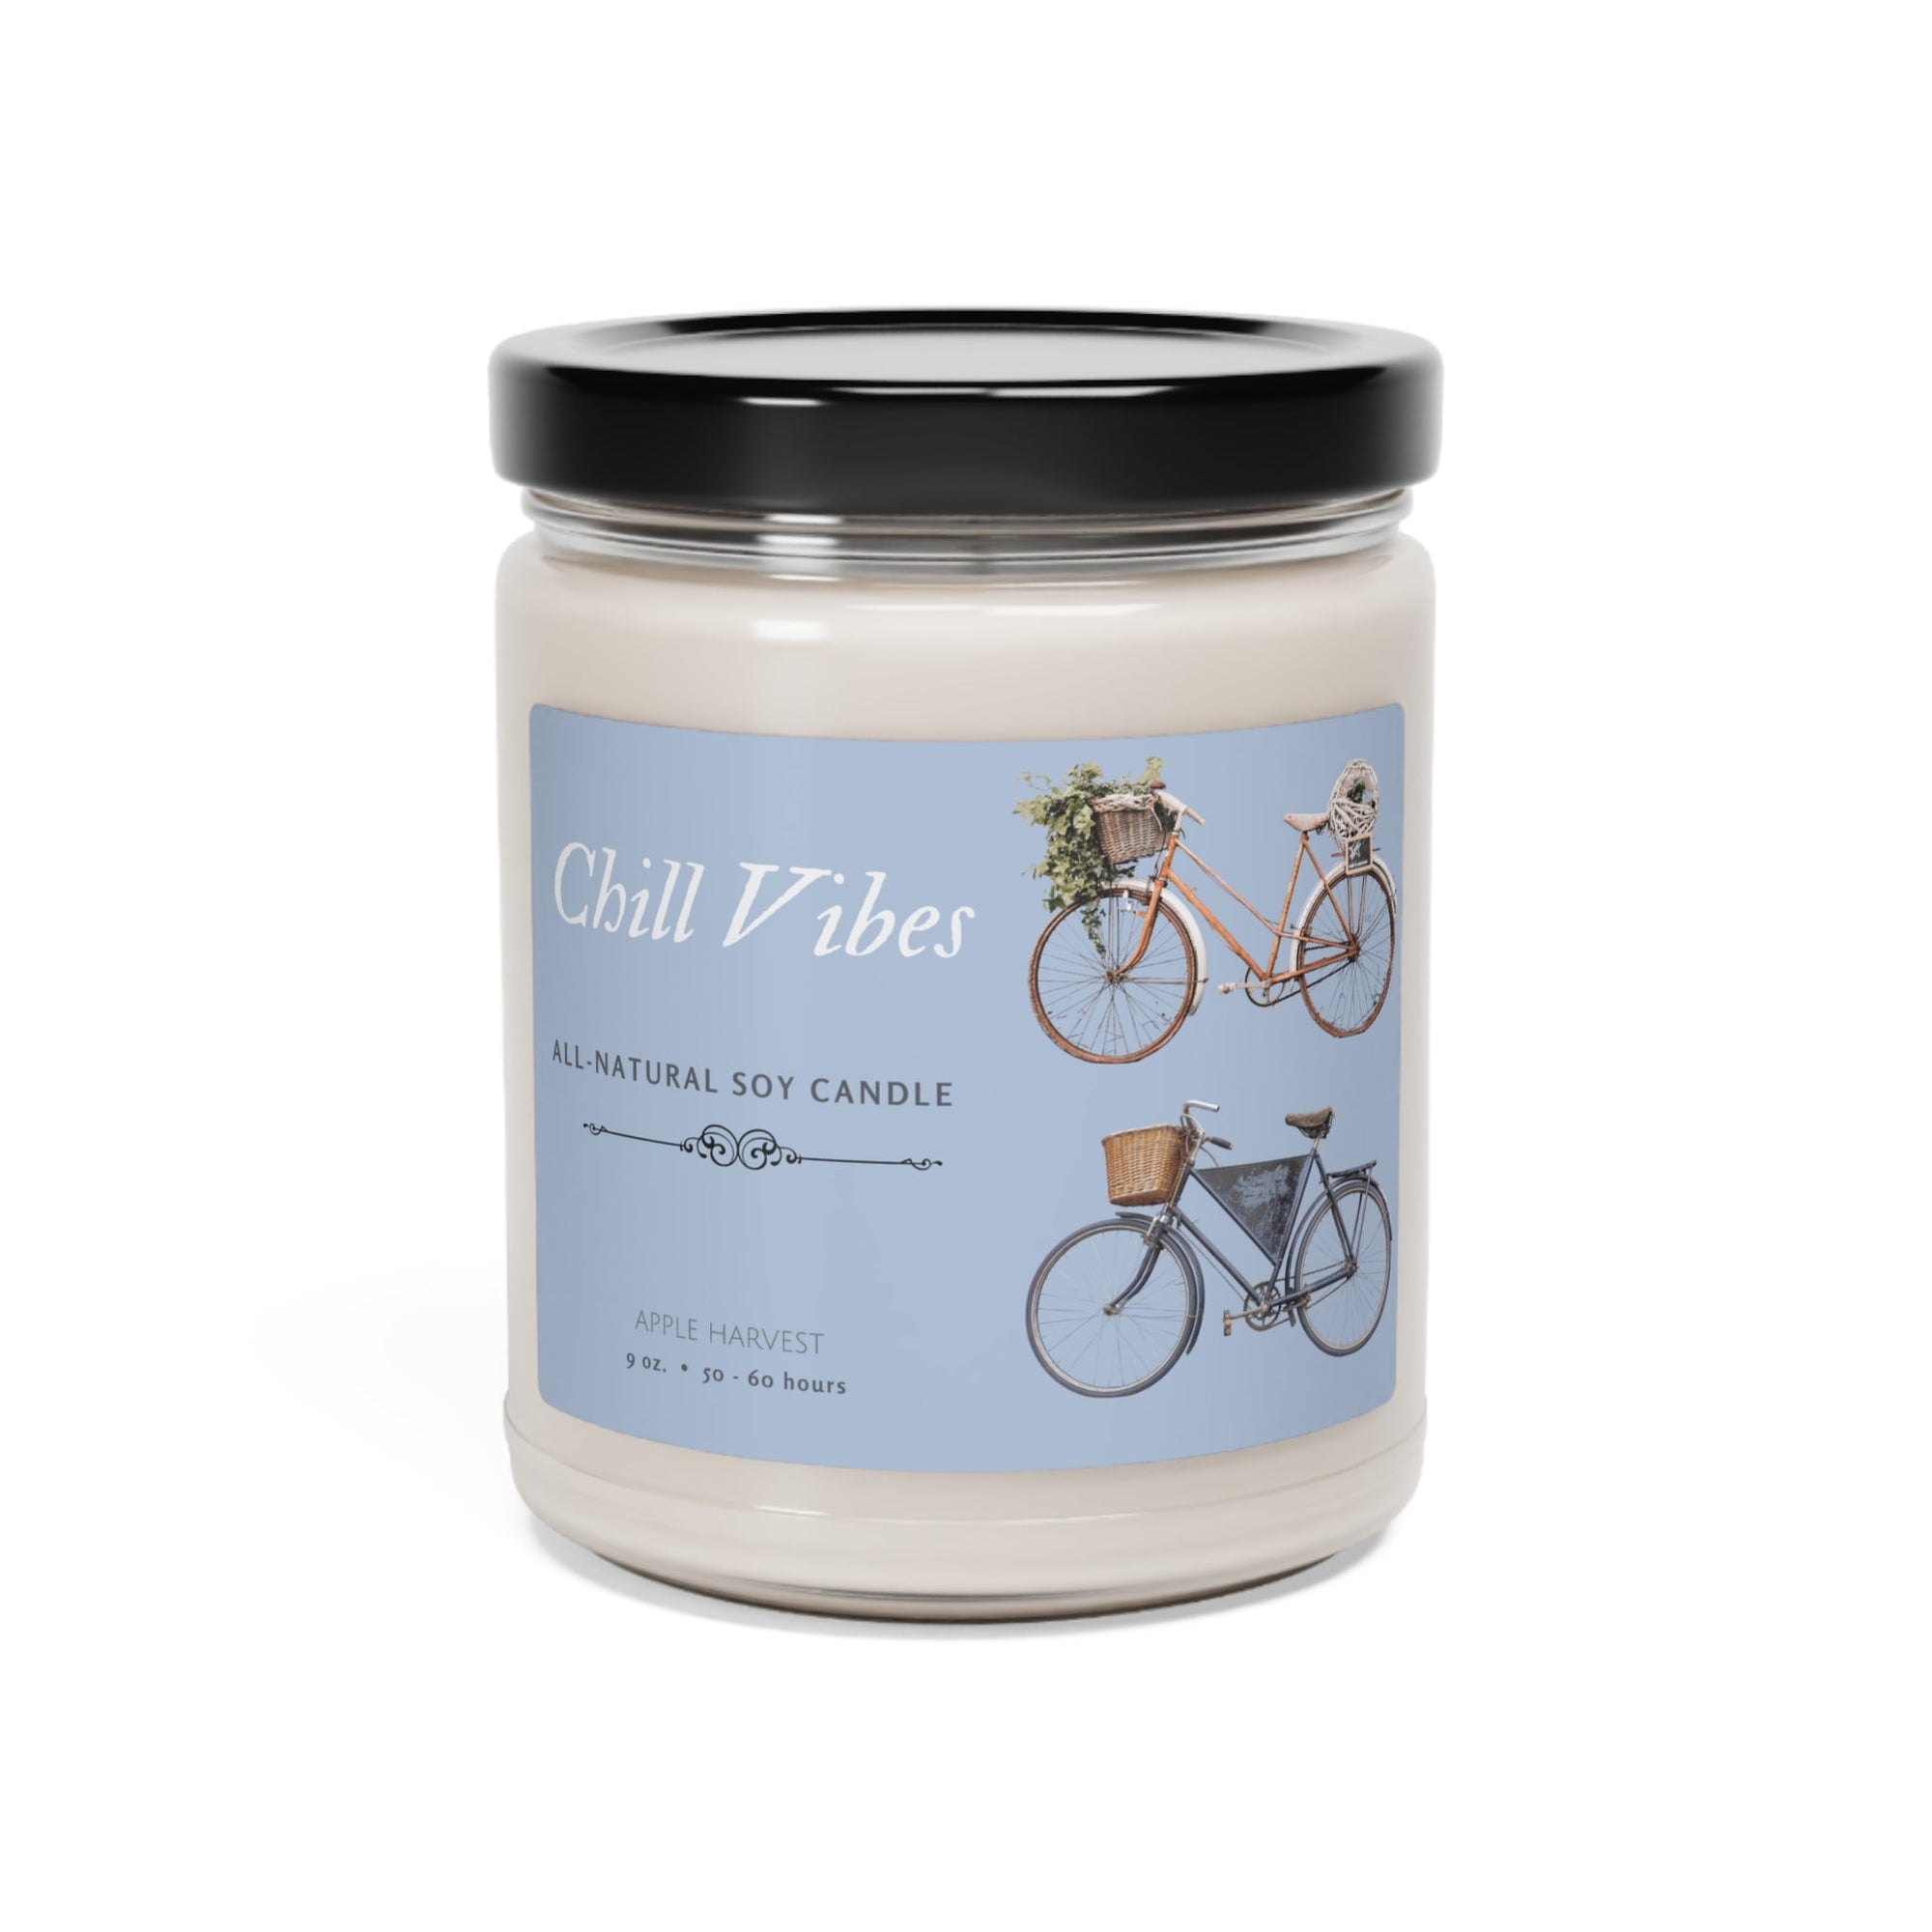 Vintage Bikes Apple Harvest Scented Soy Candle, 9oz - Element Tri & Bicycle Works